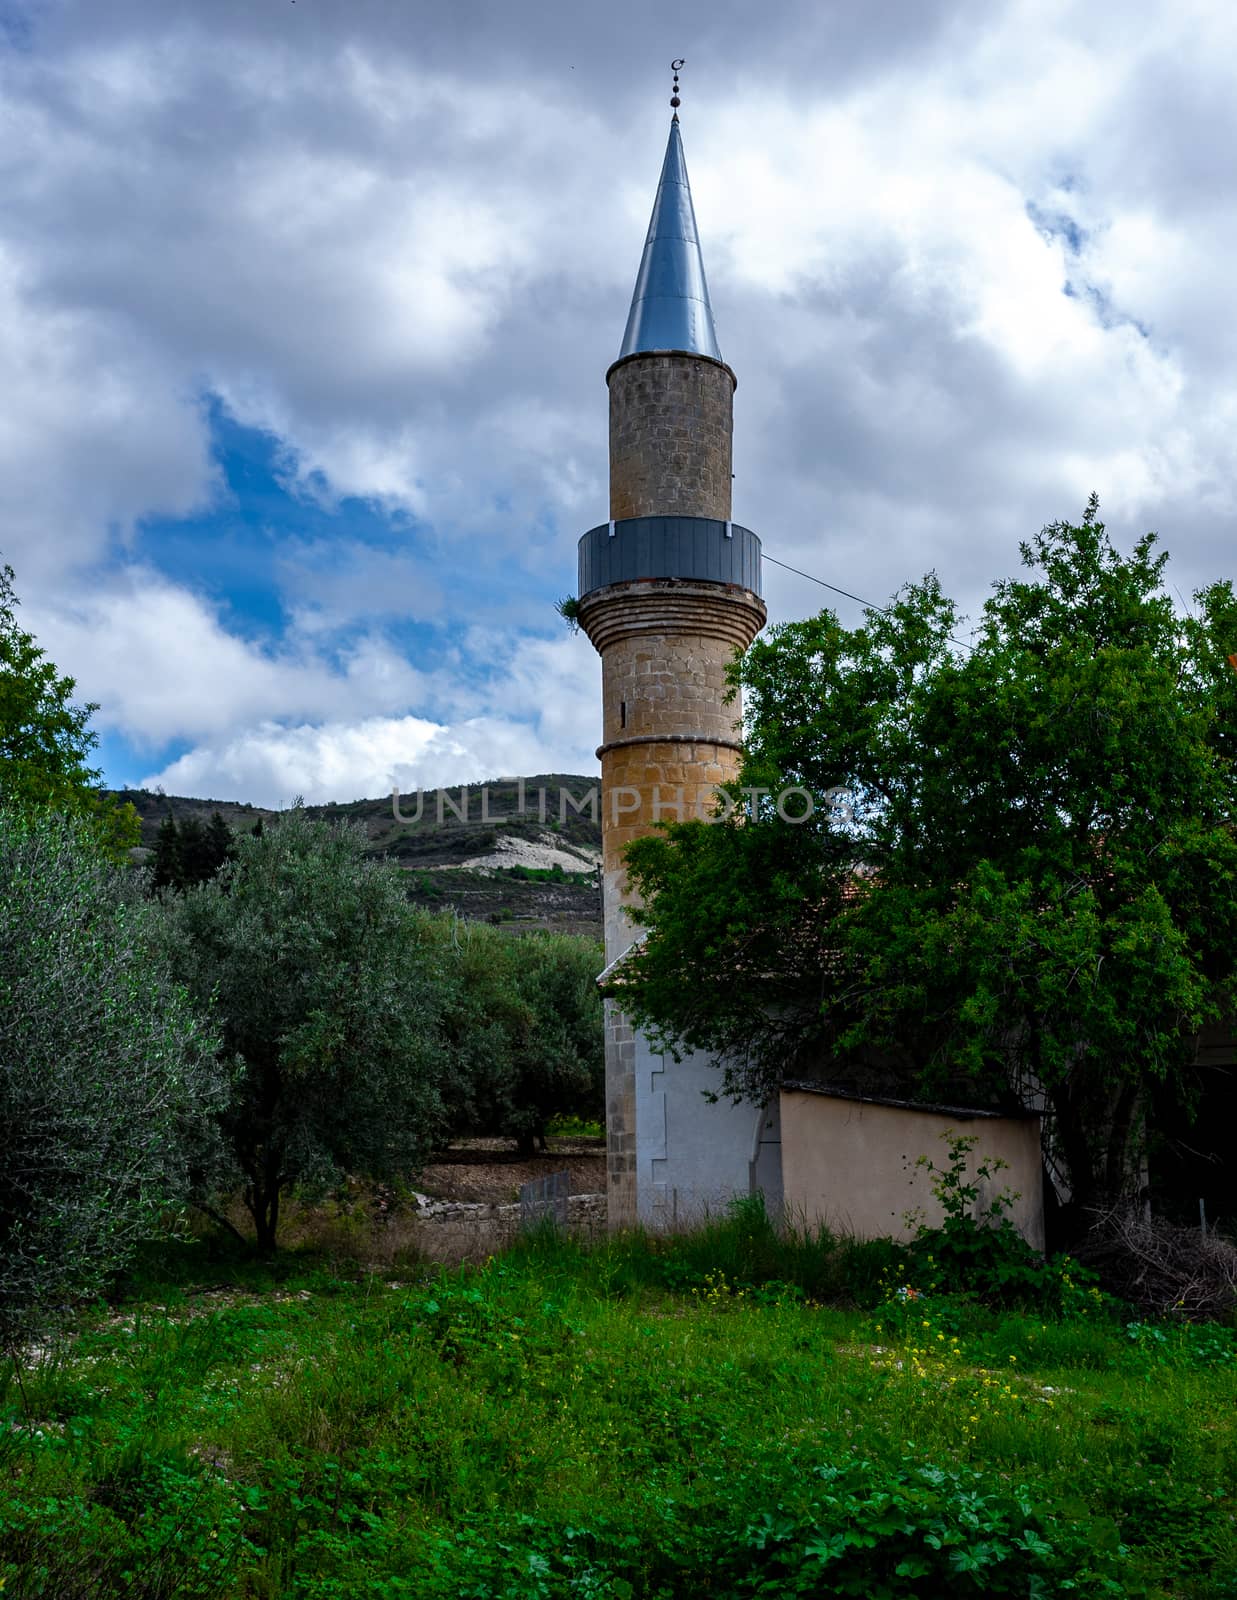 Muslim village in the mountainous part of the island of Cyprus in early spring.